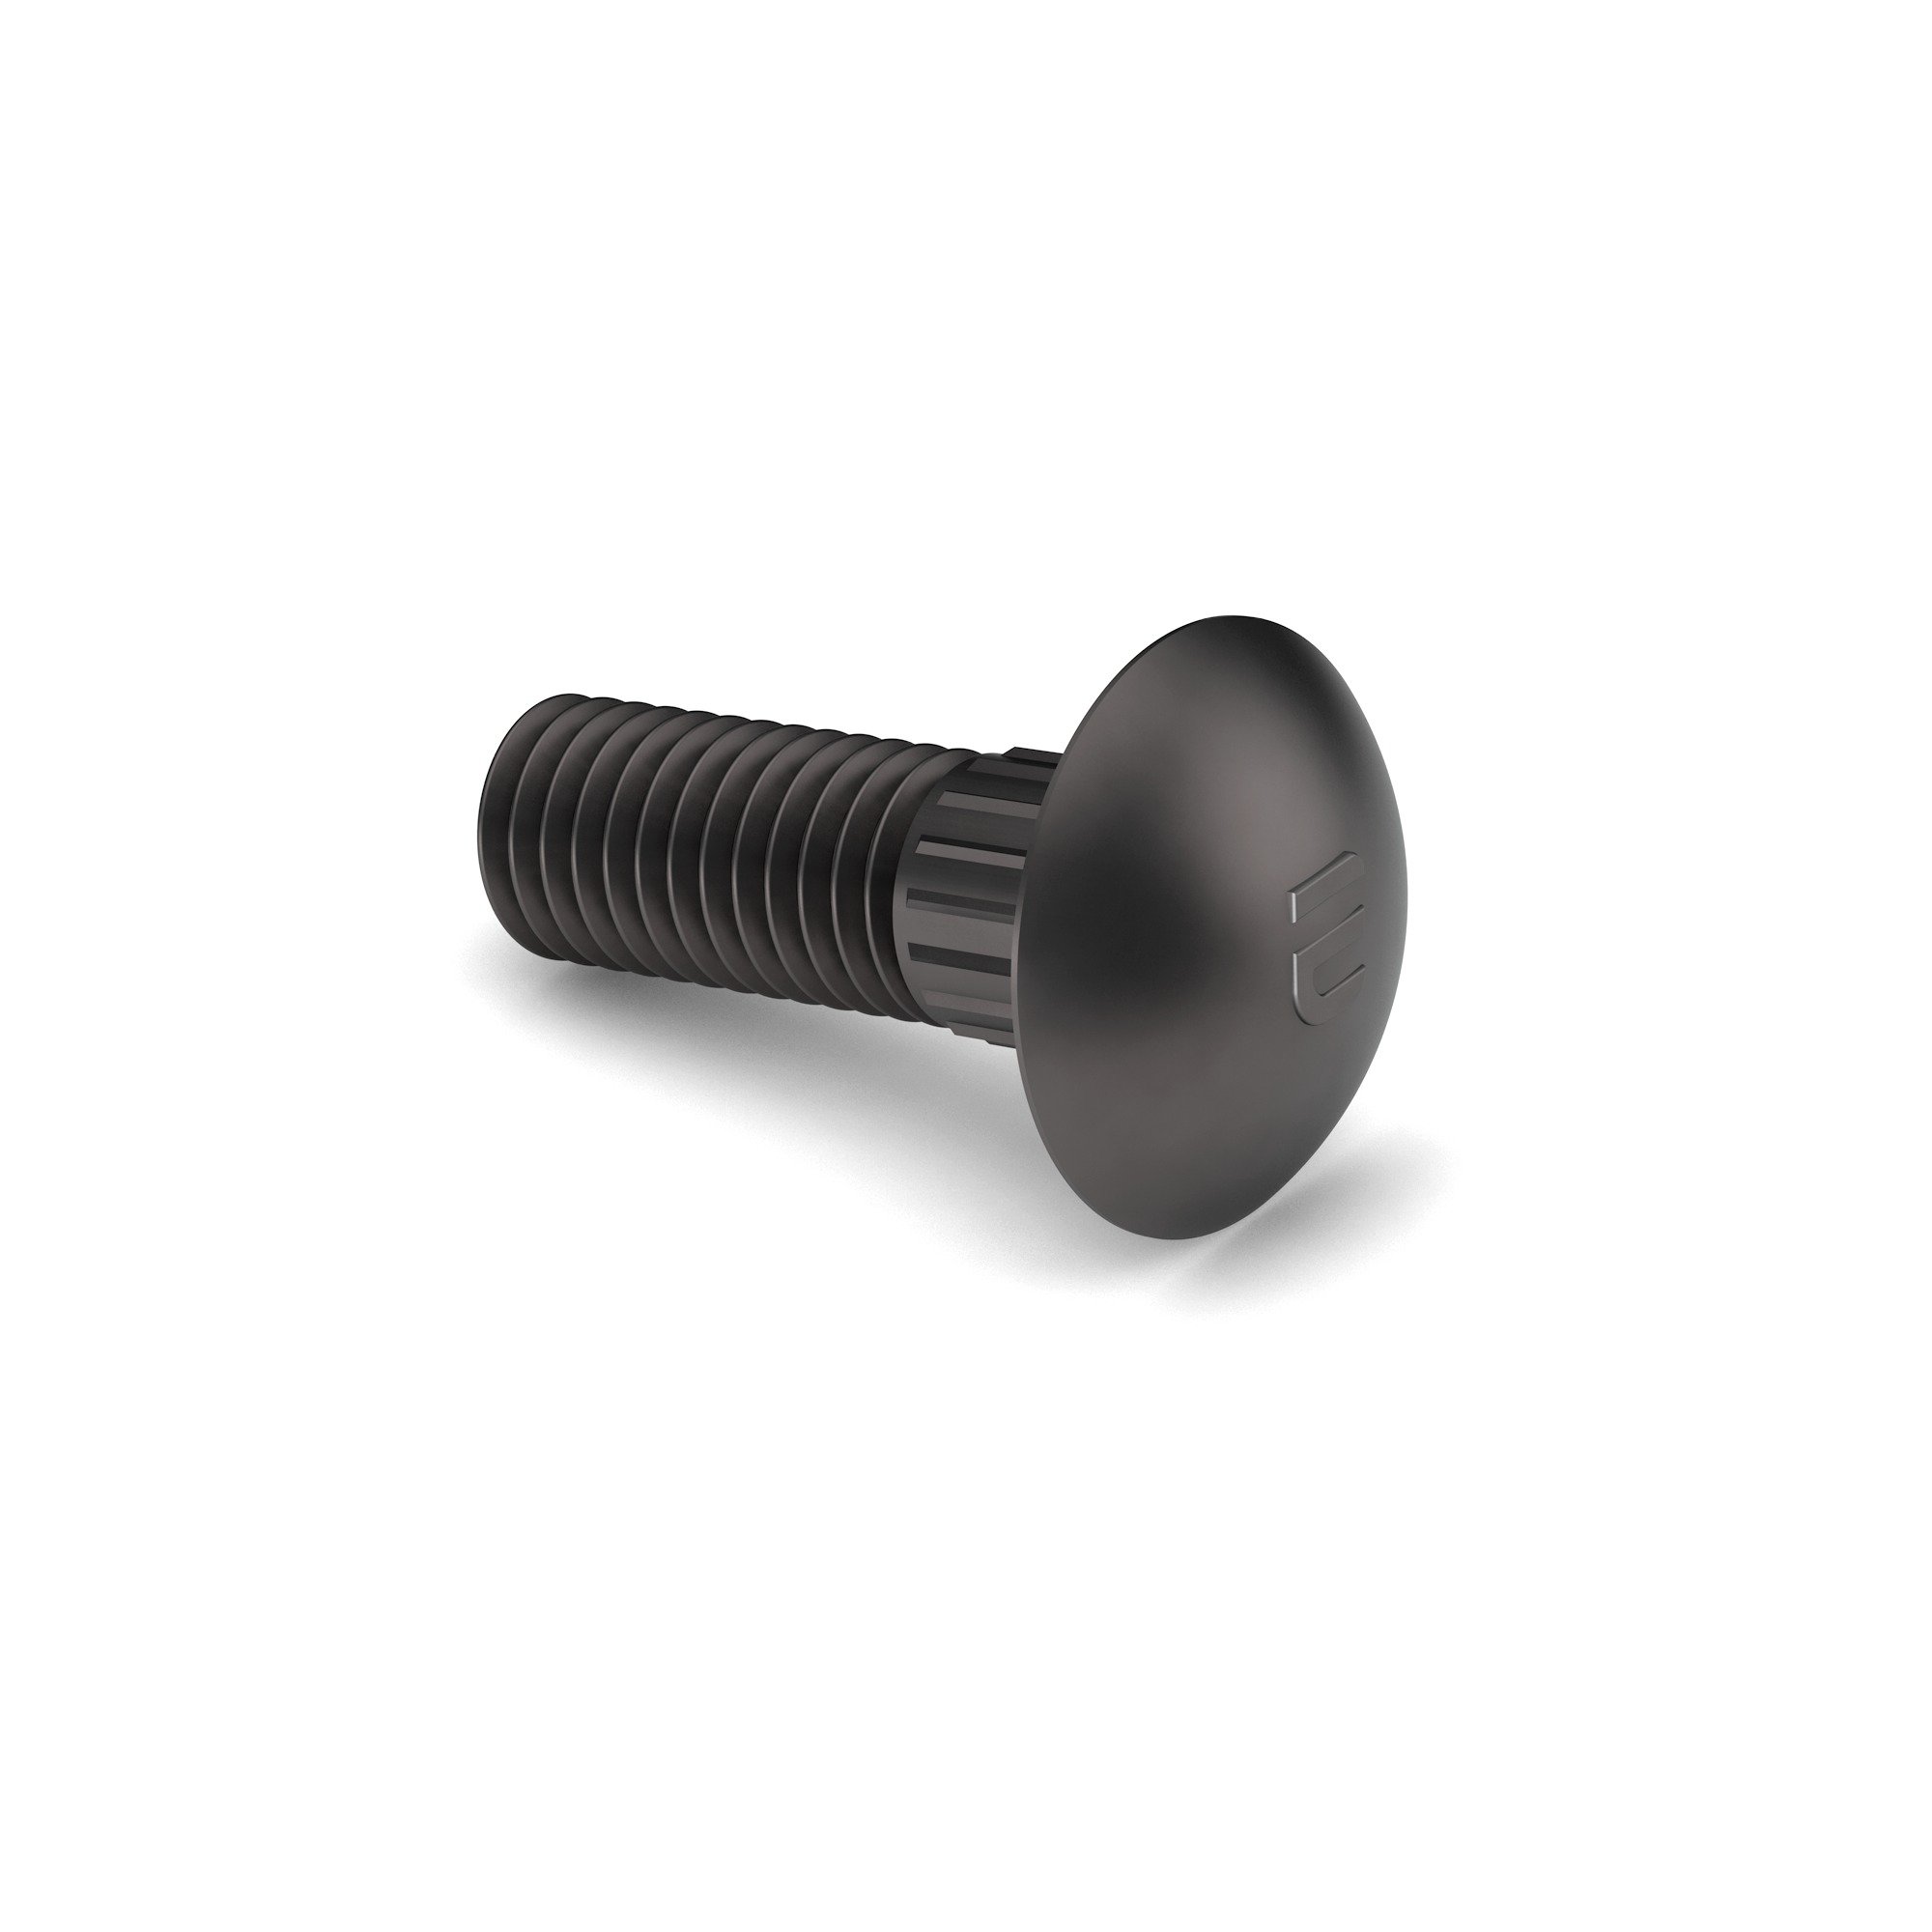 Ribbed Neck Carriage Bolt